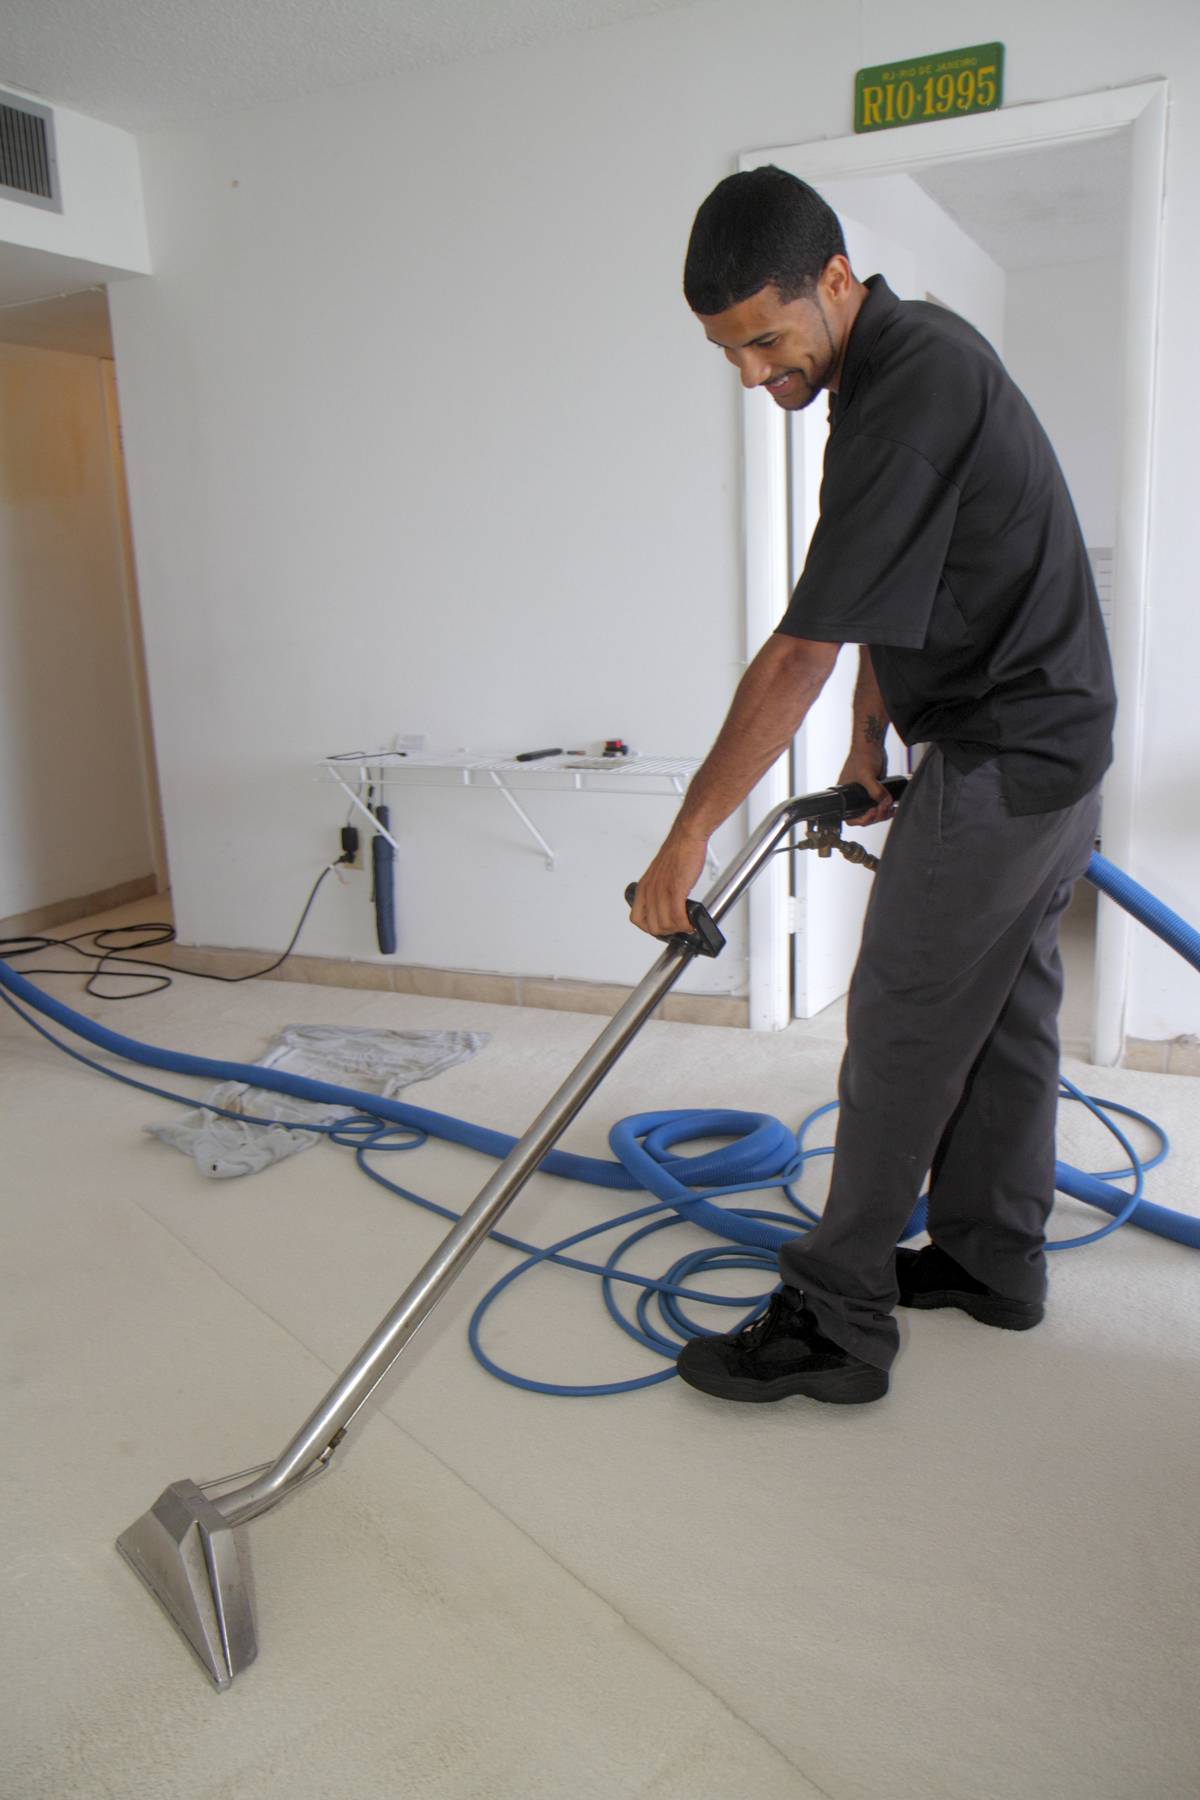 <p>It's no secret that carpets attract dust. Researchers from Ohio State University discovered that carpets not only bring in dust, but also mold. Because carpets are porous, they trap moisture. In fact, a dusty carpet can remain moist for up to six hours.</p> <p>The more carpet you have, the more dust and mold your home will get. Of course, not everyone can afford to replace their carpet. If you have carpet, aim to vacuum it twice a week.</p>